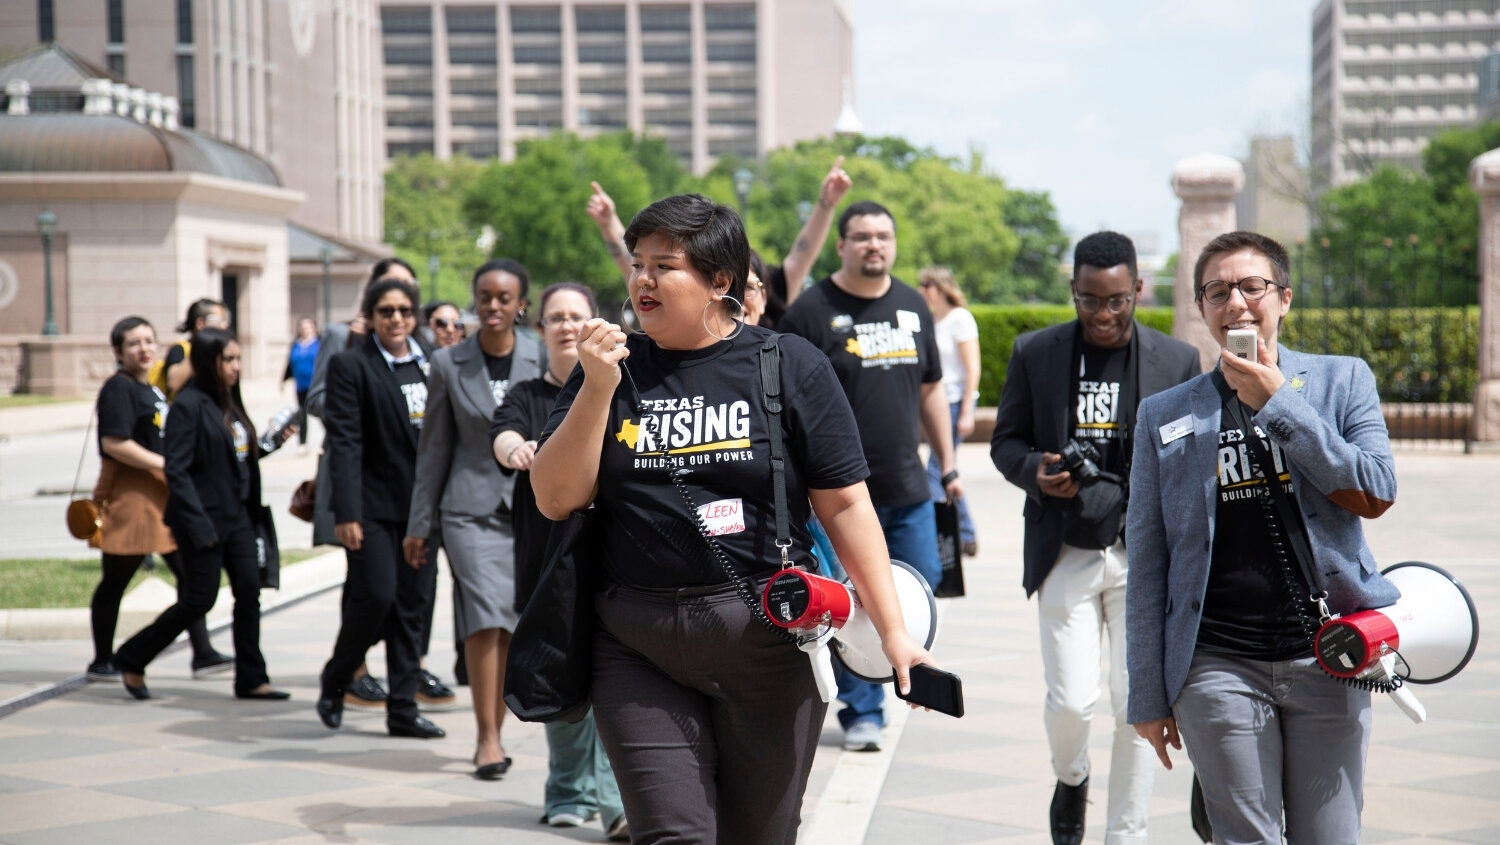 A group of protesters walk wearing Texas Freedom Network Education Fund shirts. The two people at the front speak into bullhorns